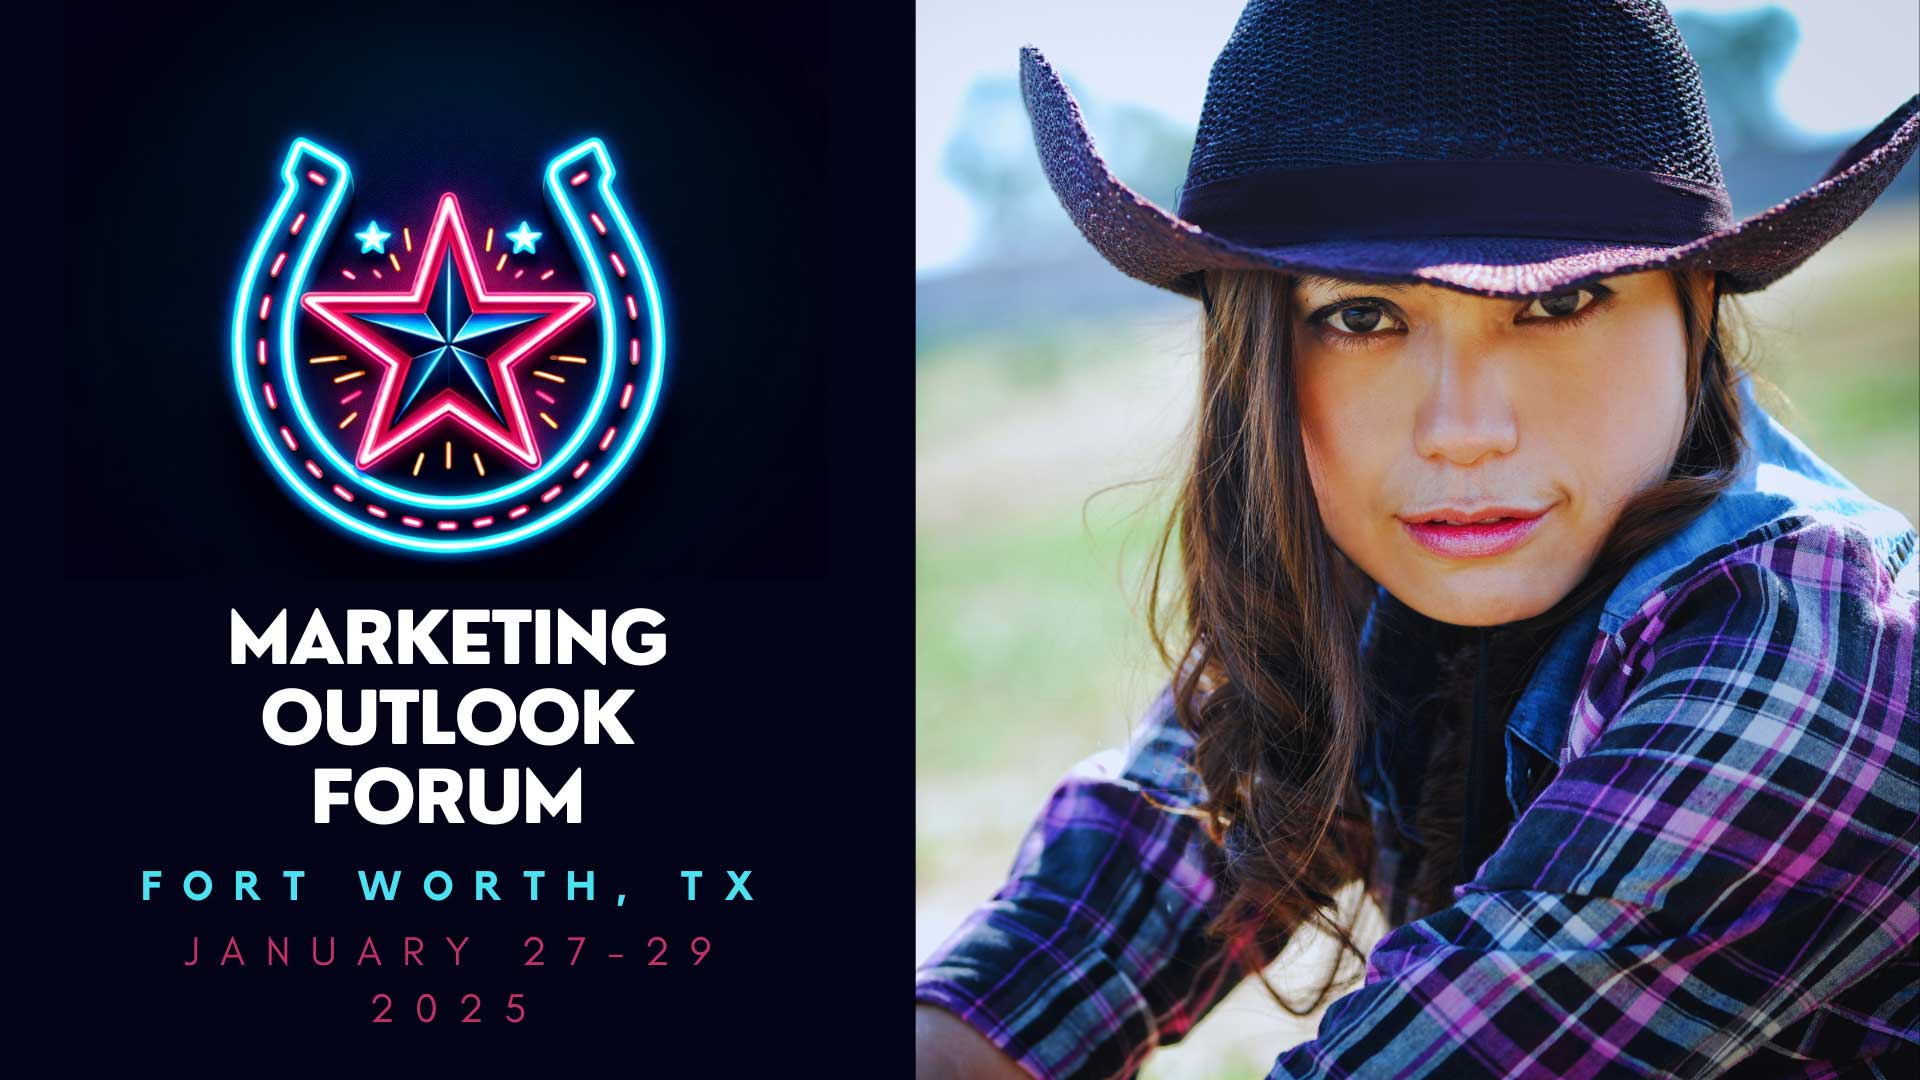 Marketing Outlook Forum 2025 - Fort Worth, Texas